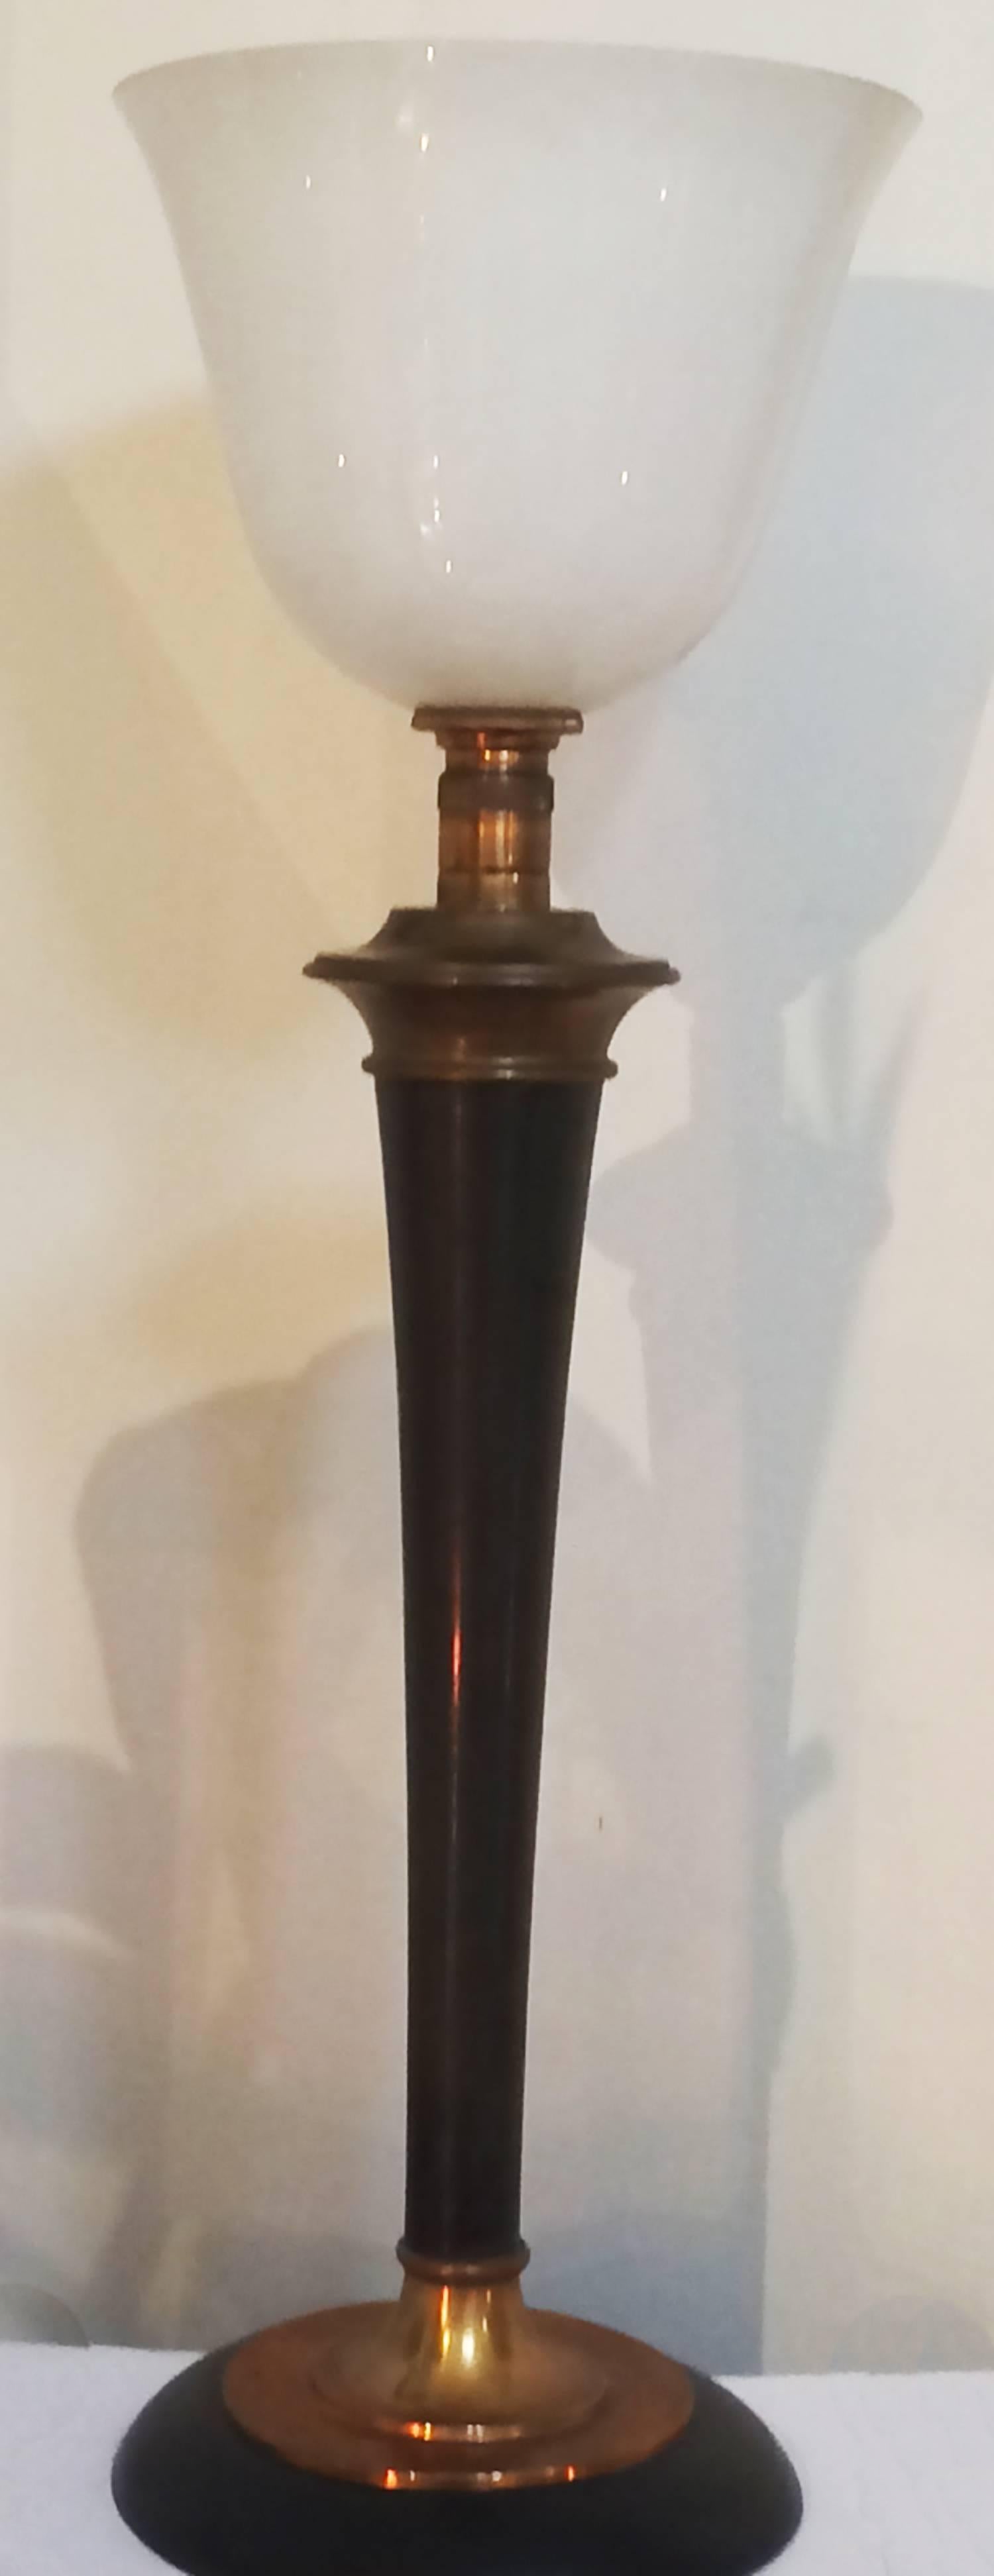 Art Deco uplighter lamp by Mazda, original factory markings to the glass, with original copper lamp components and switch mechanisms are still intact. It has been converted to a 12Volt system, with the converter from 240 V to 12V, at the wall plug,